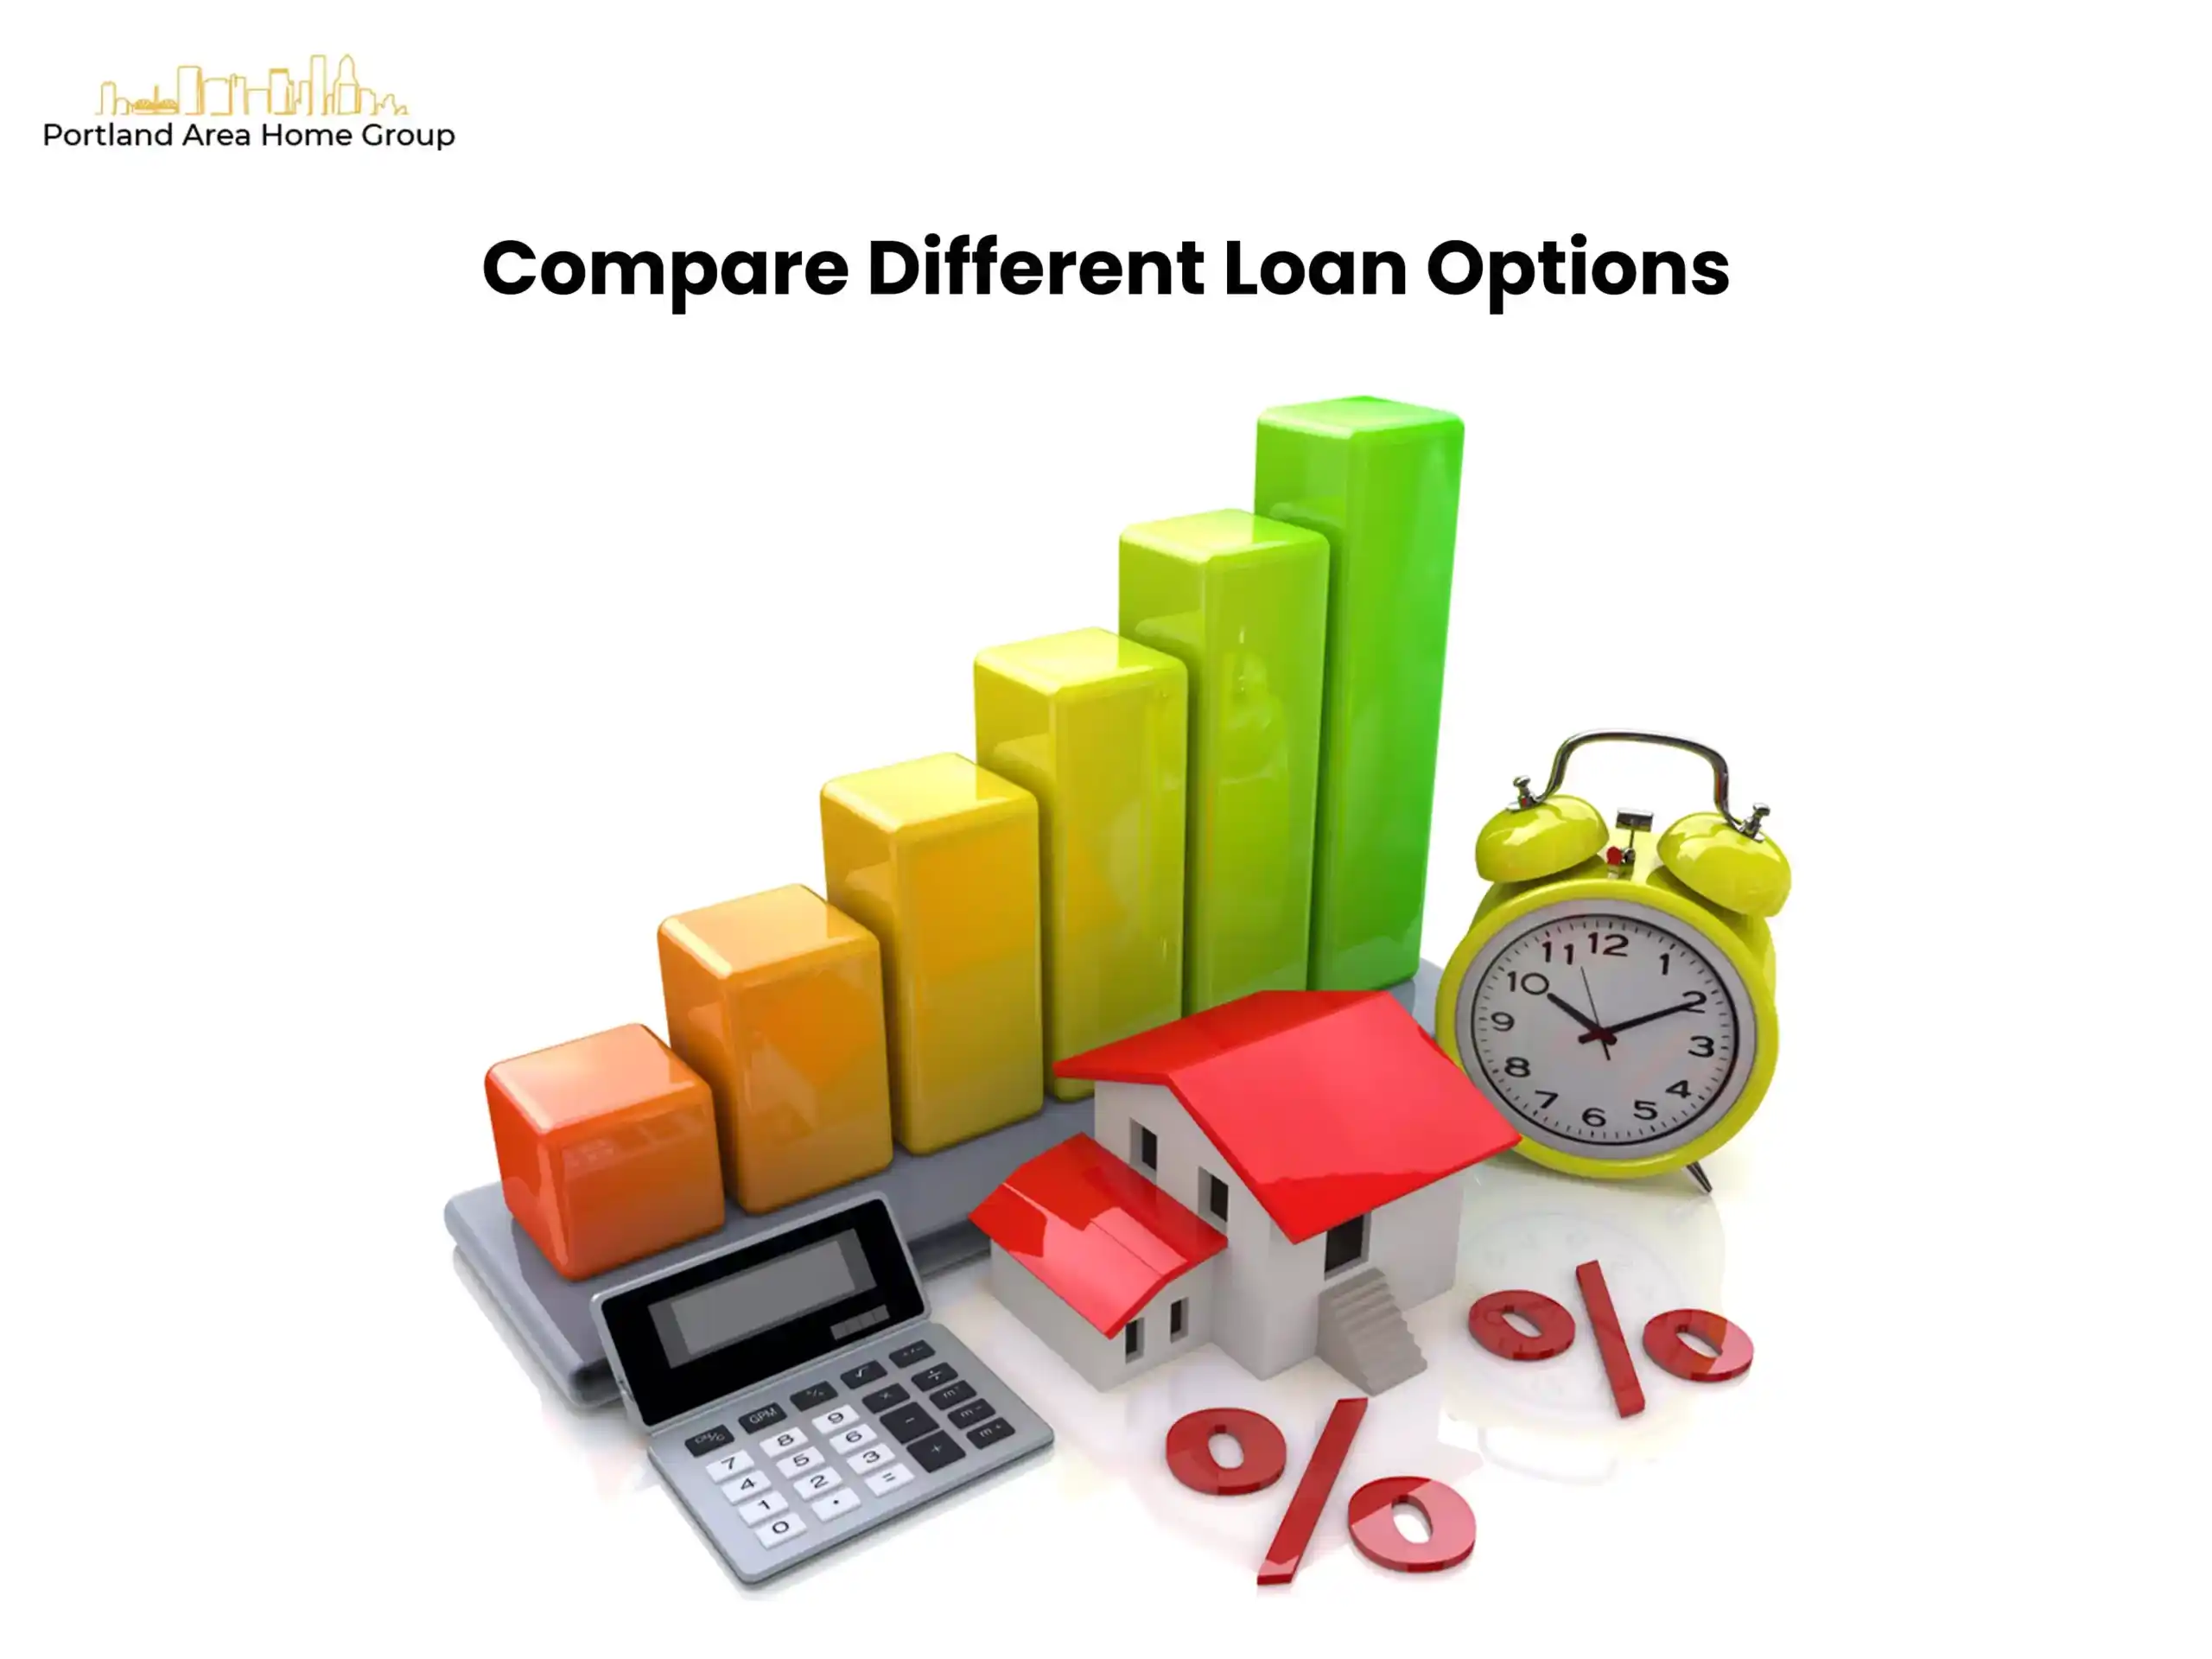 Compare Different Loan Options